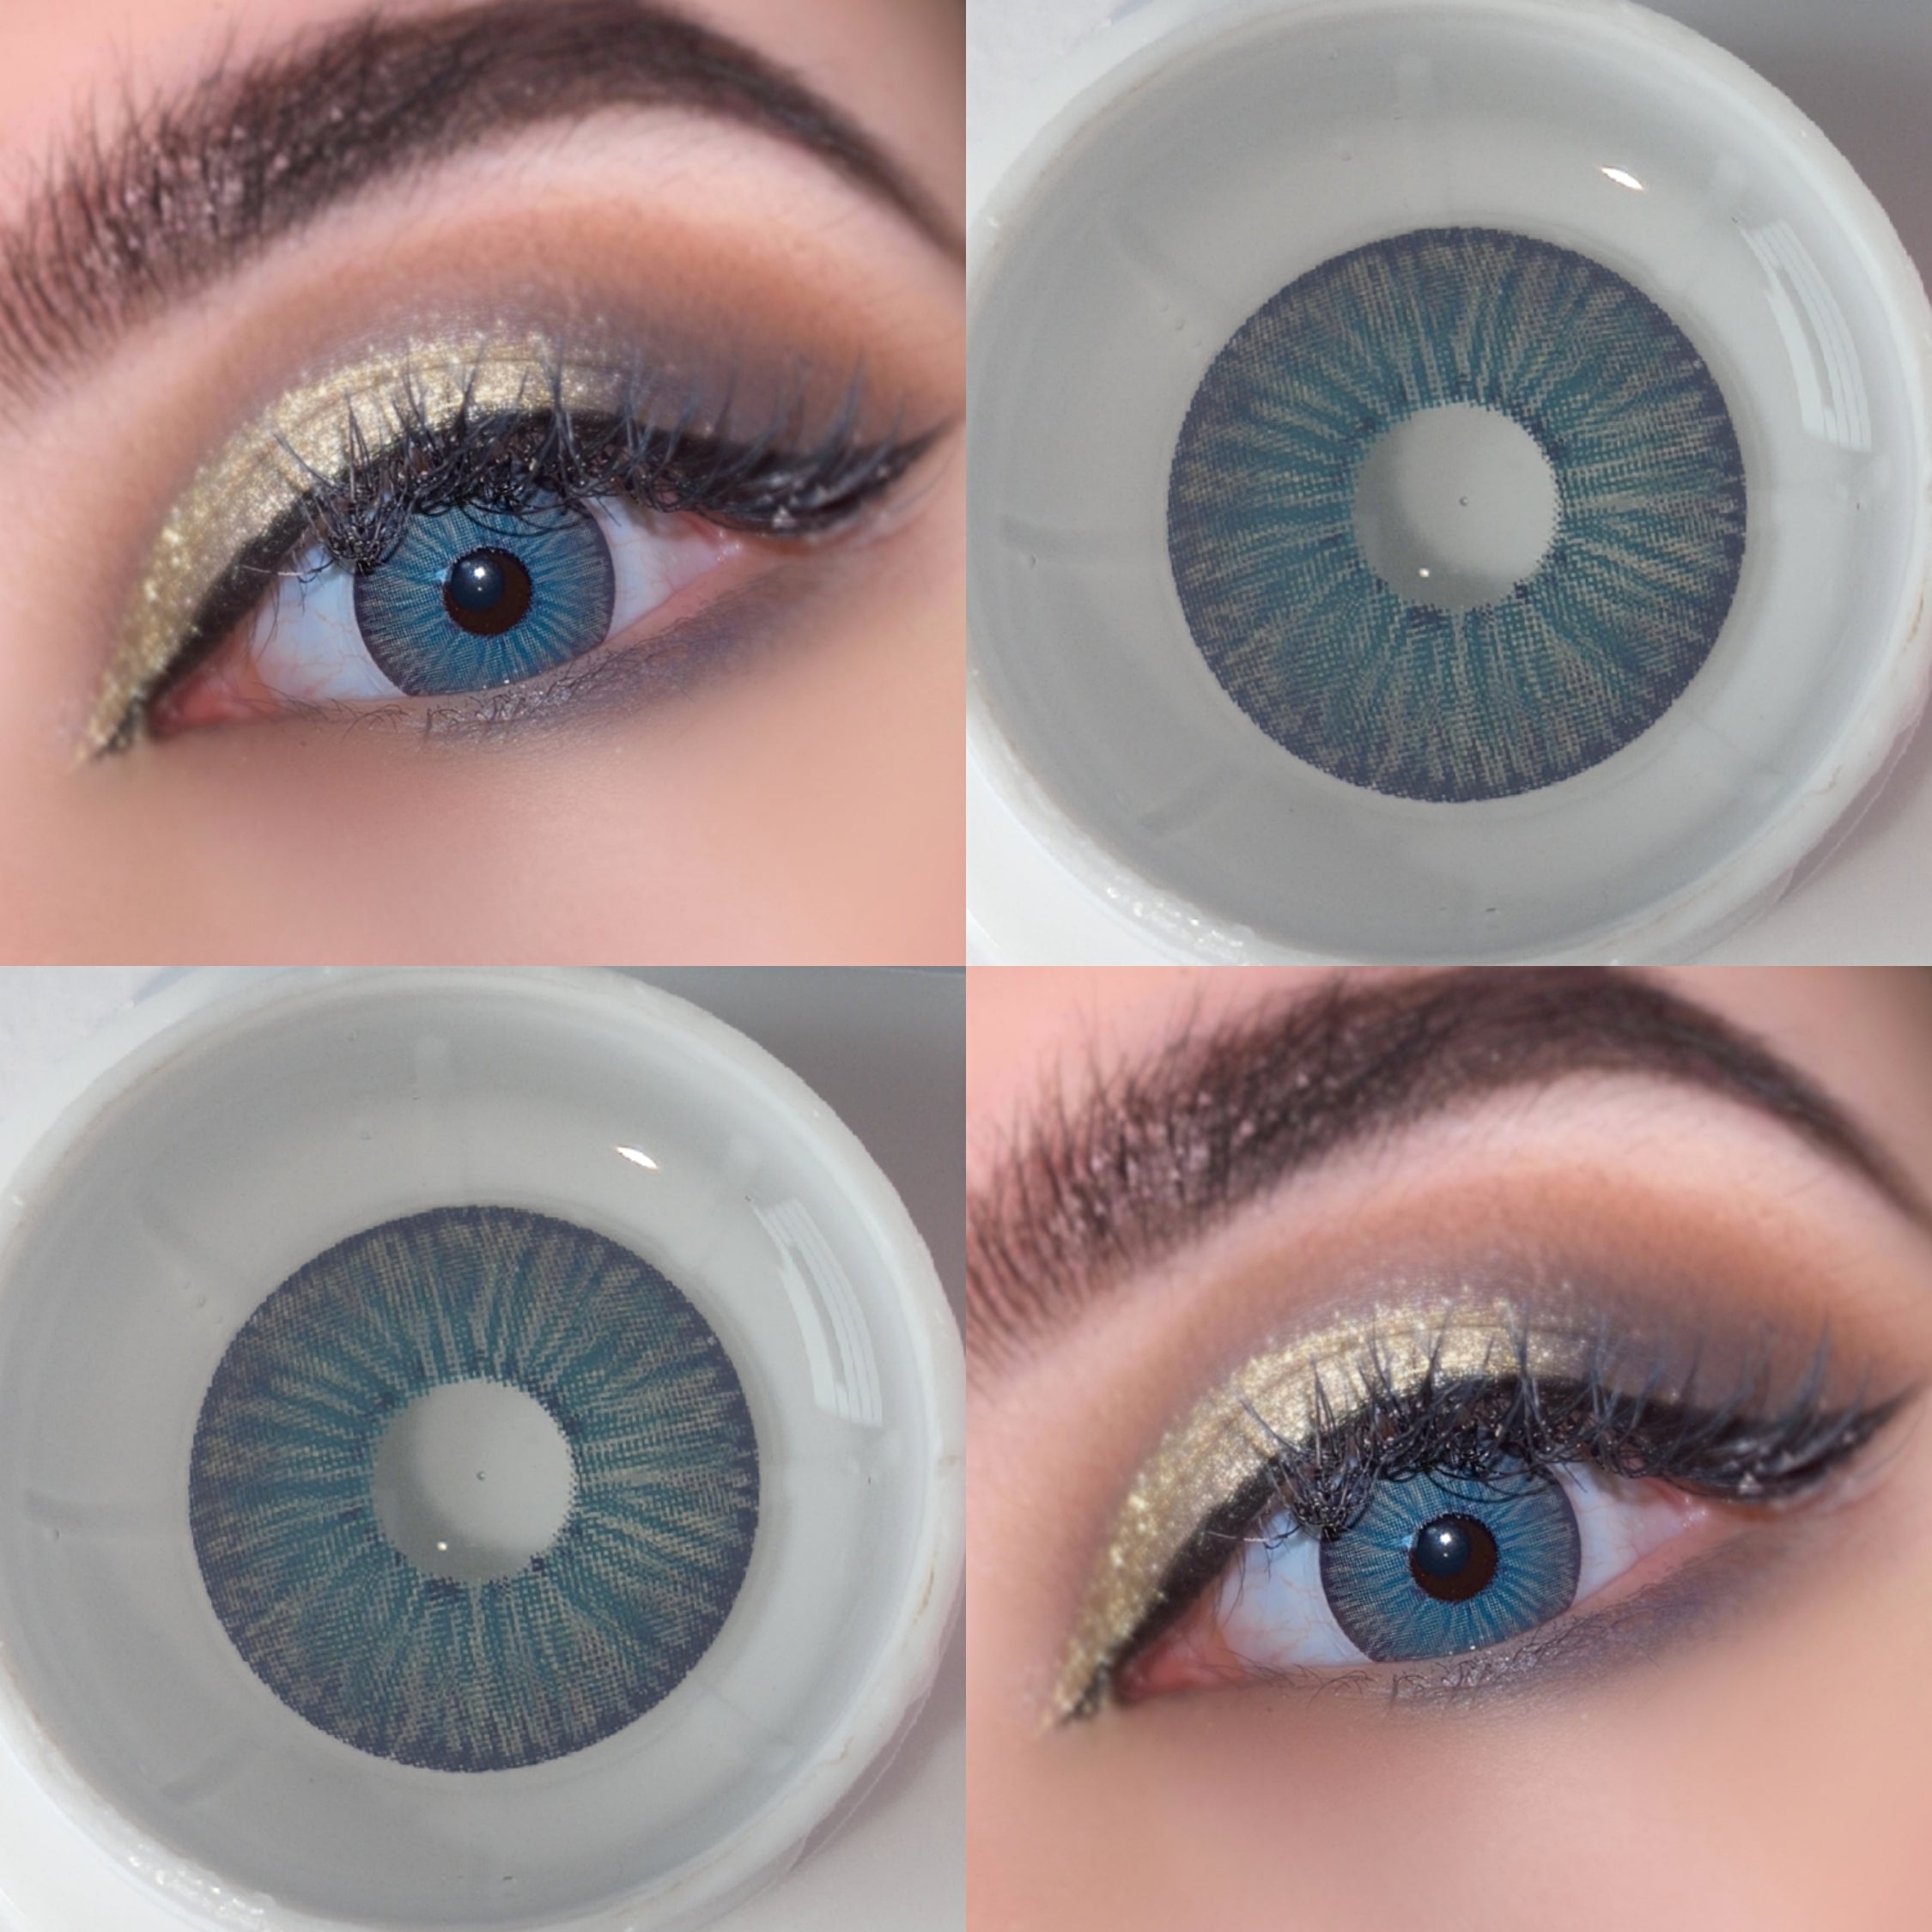 Colourfuleye New York Pro Slate Grey Colored Contact Lenses